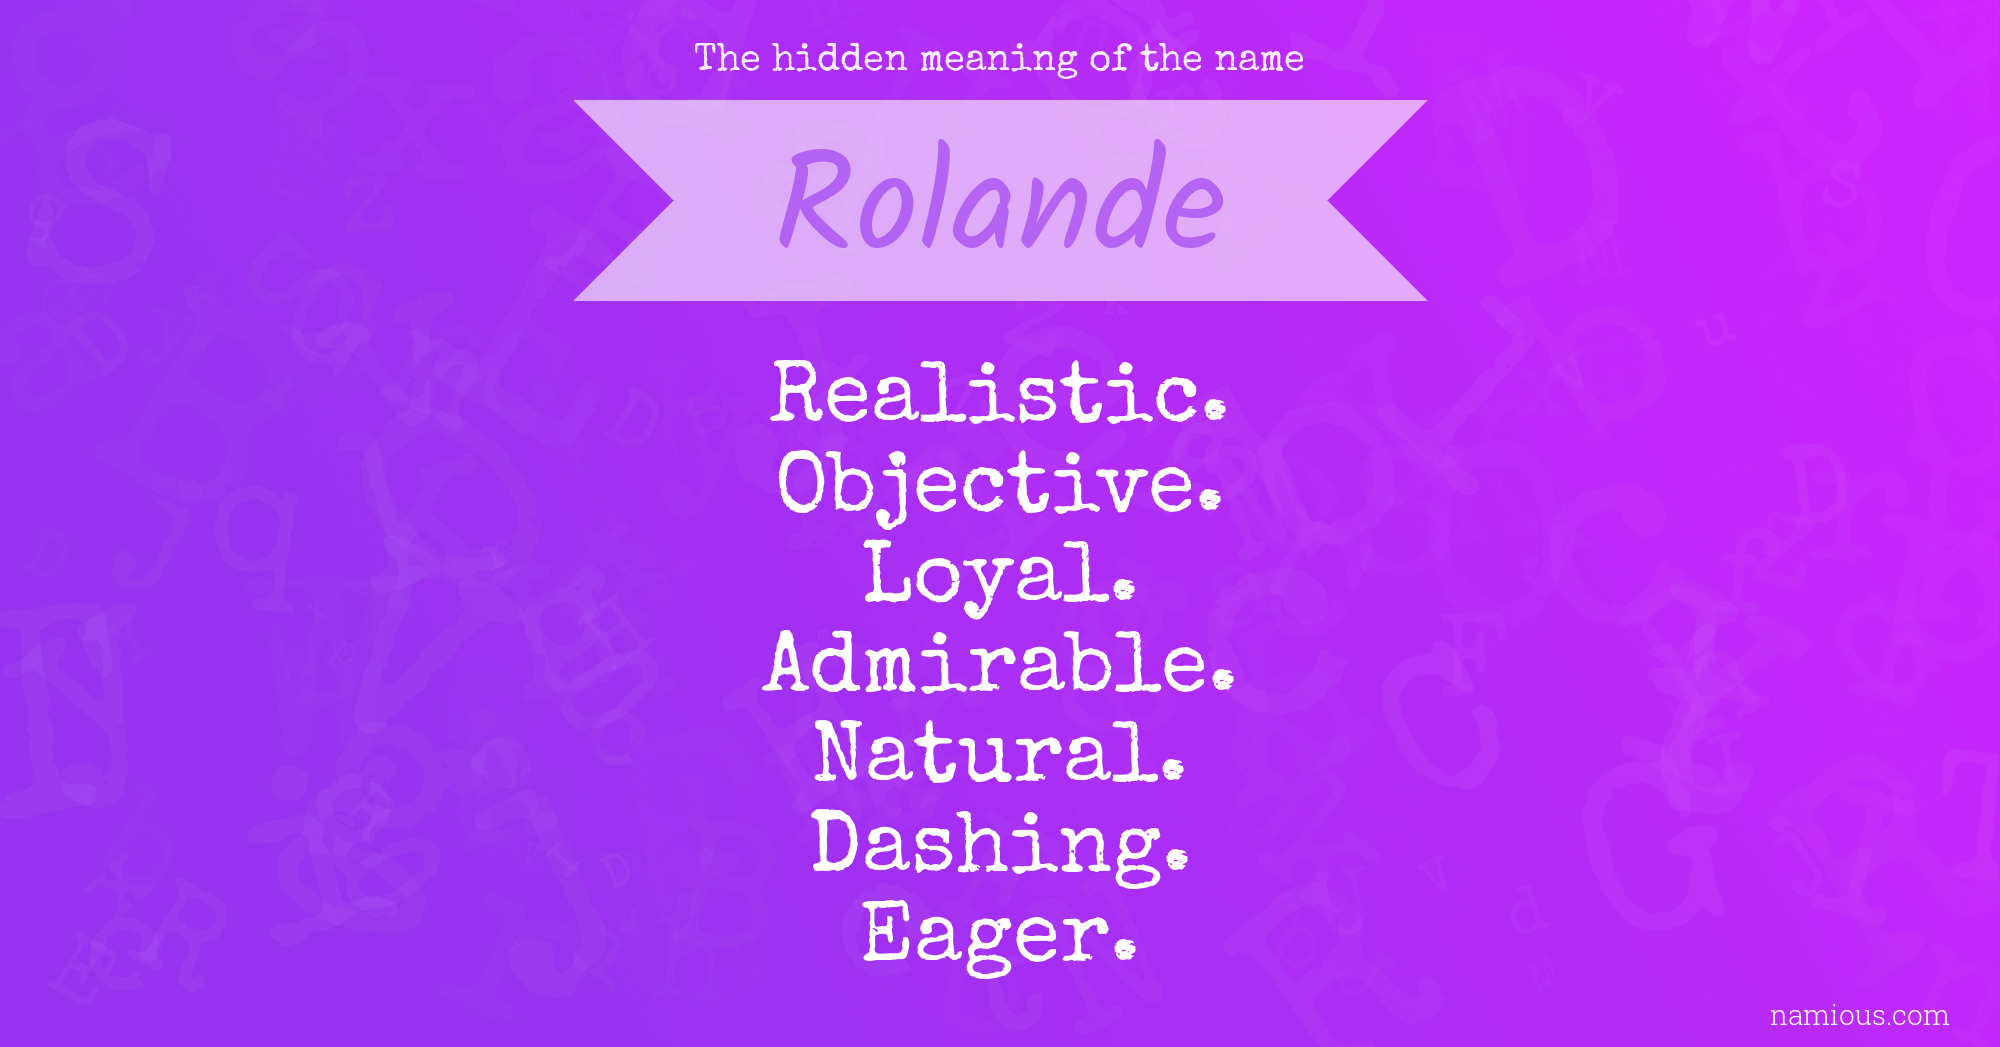 The hidden meaning of the name Rolande